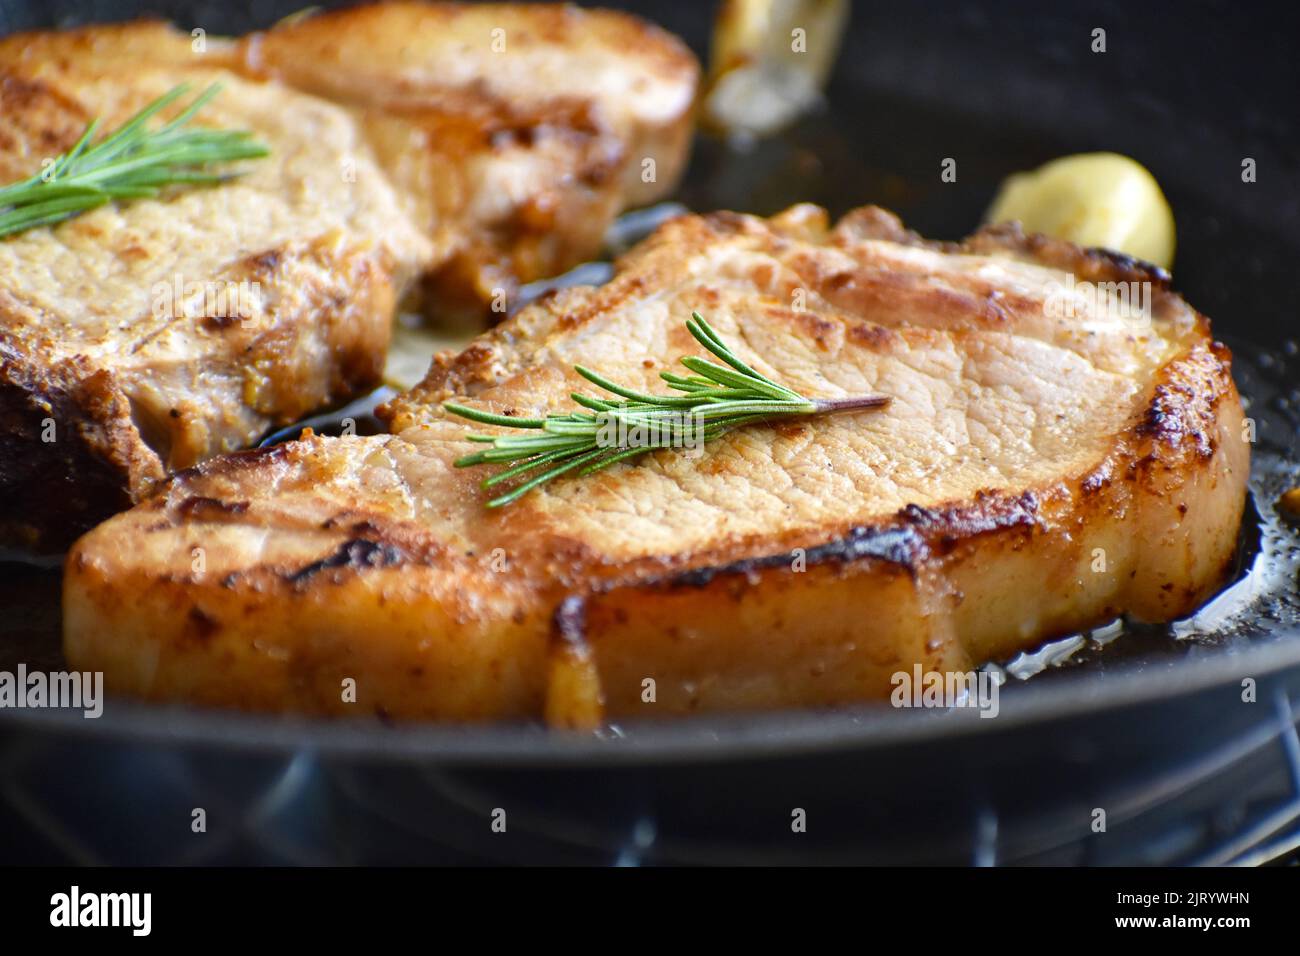 Pork chop on a frying pan. Grilled pork steak with garlic and rosemary on a black metal pan. Stock Photo